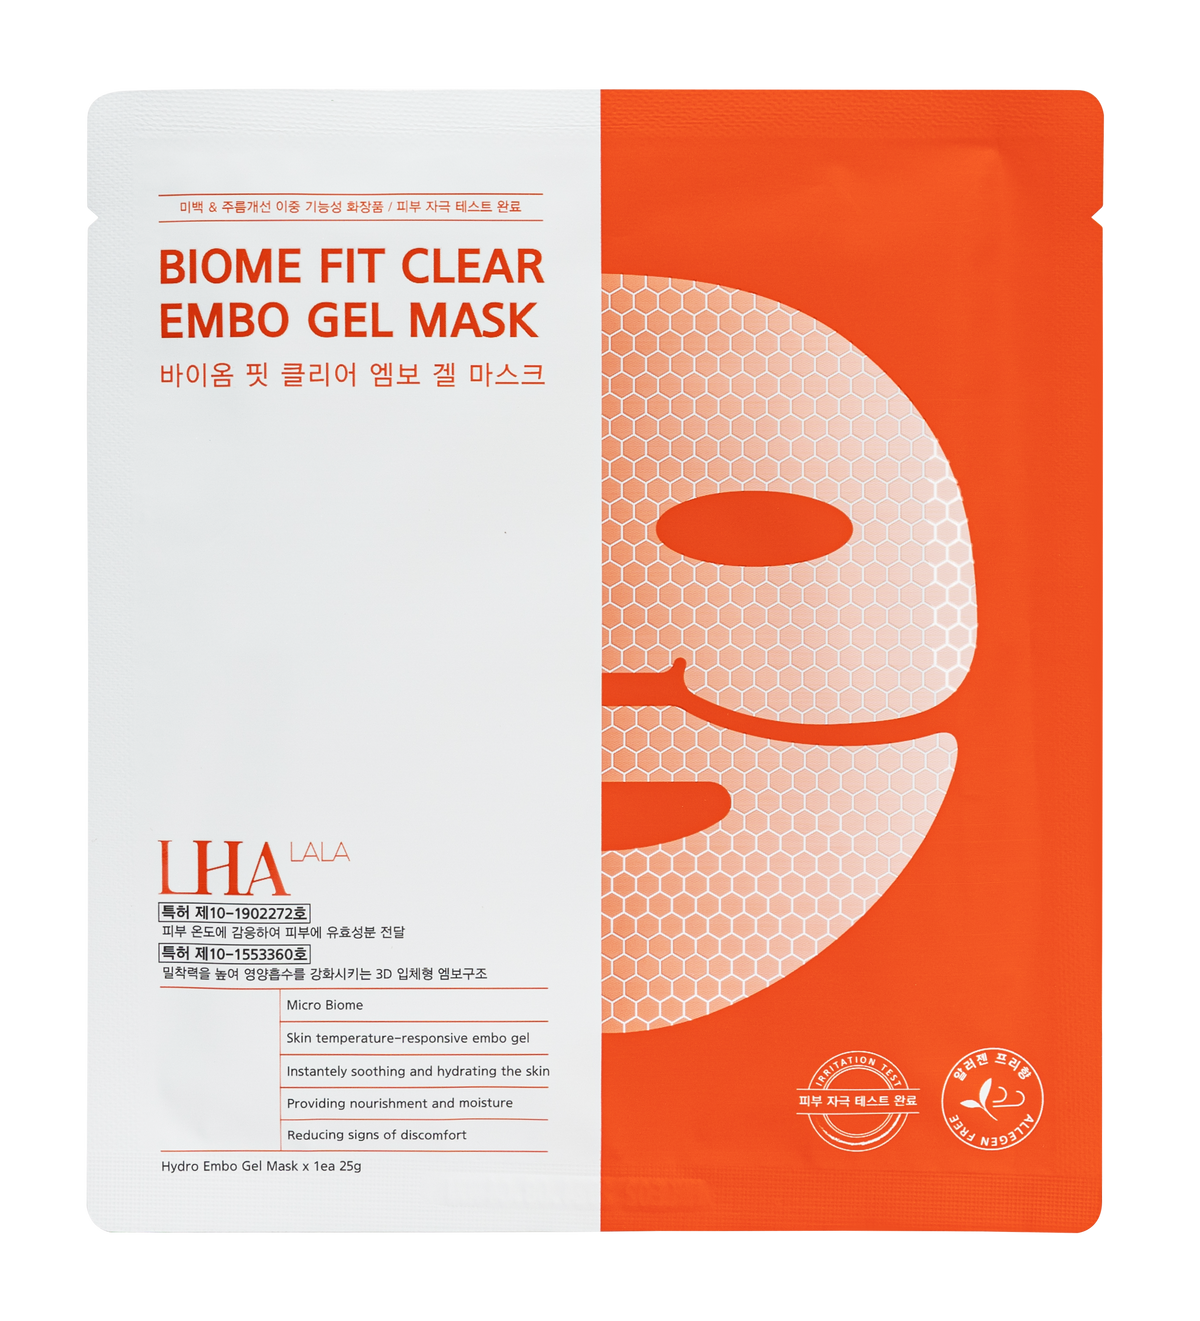 LHA LALA BIOME FIT CLEAR EMBO GEL MASK - Order 5 and get the 6th one FREE